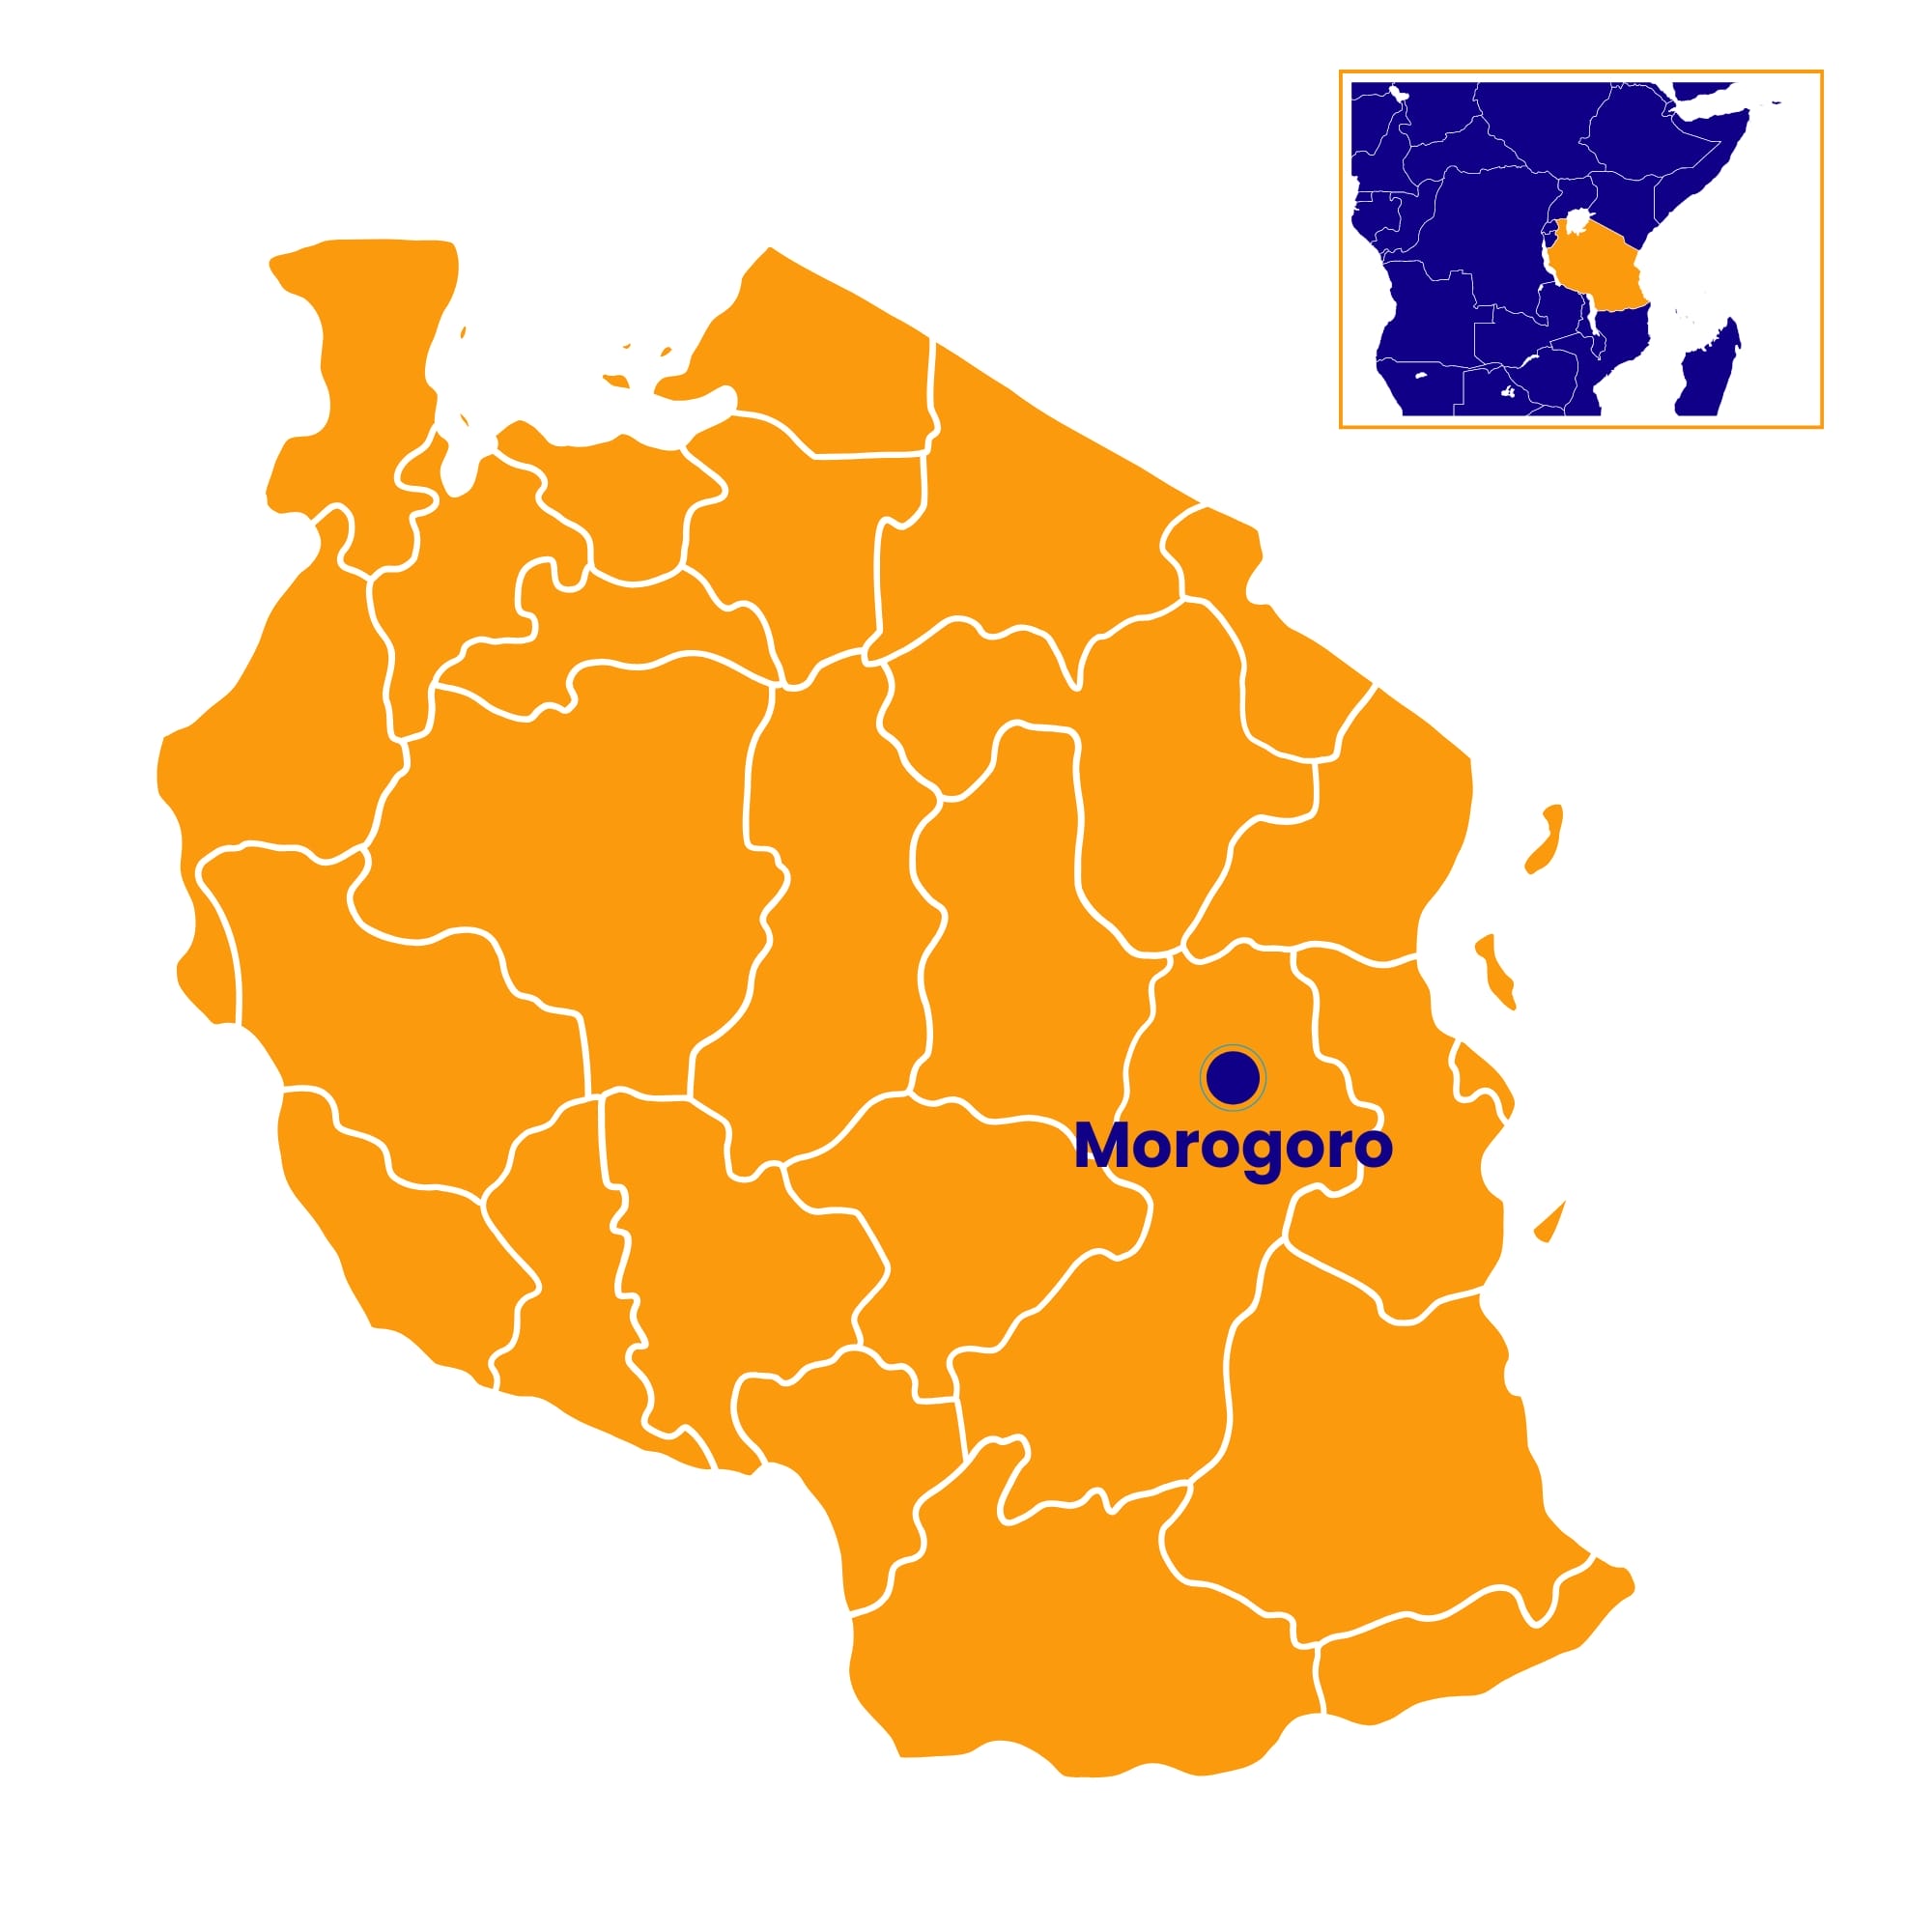 Map showing location of Morogoro in east/central Tanzania